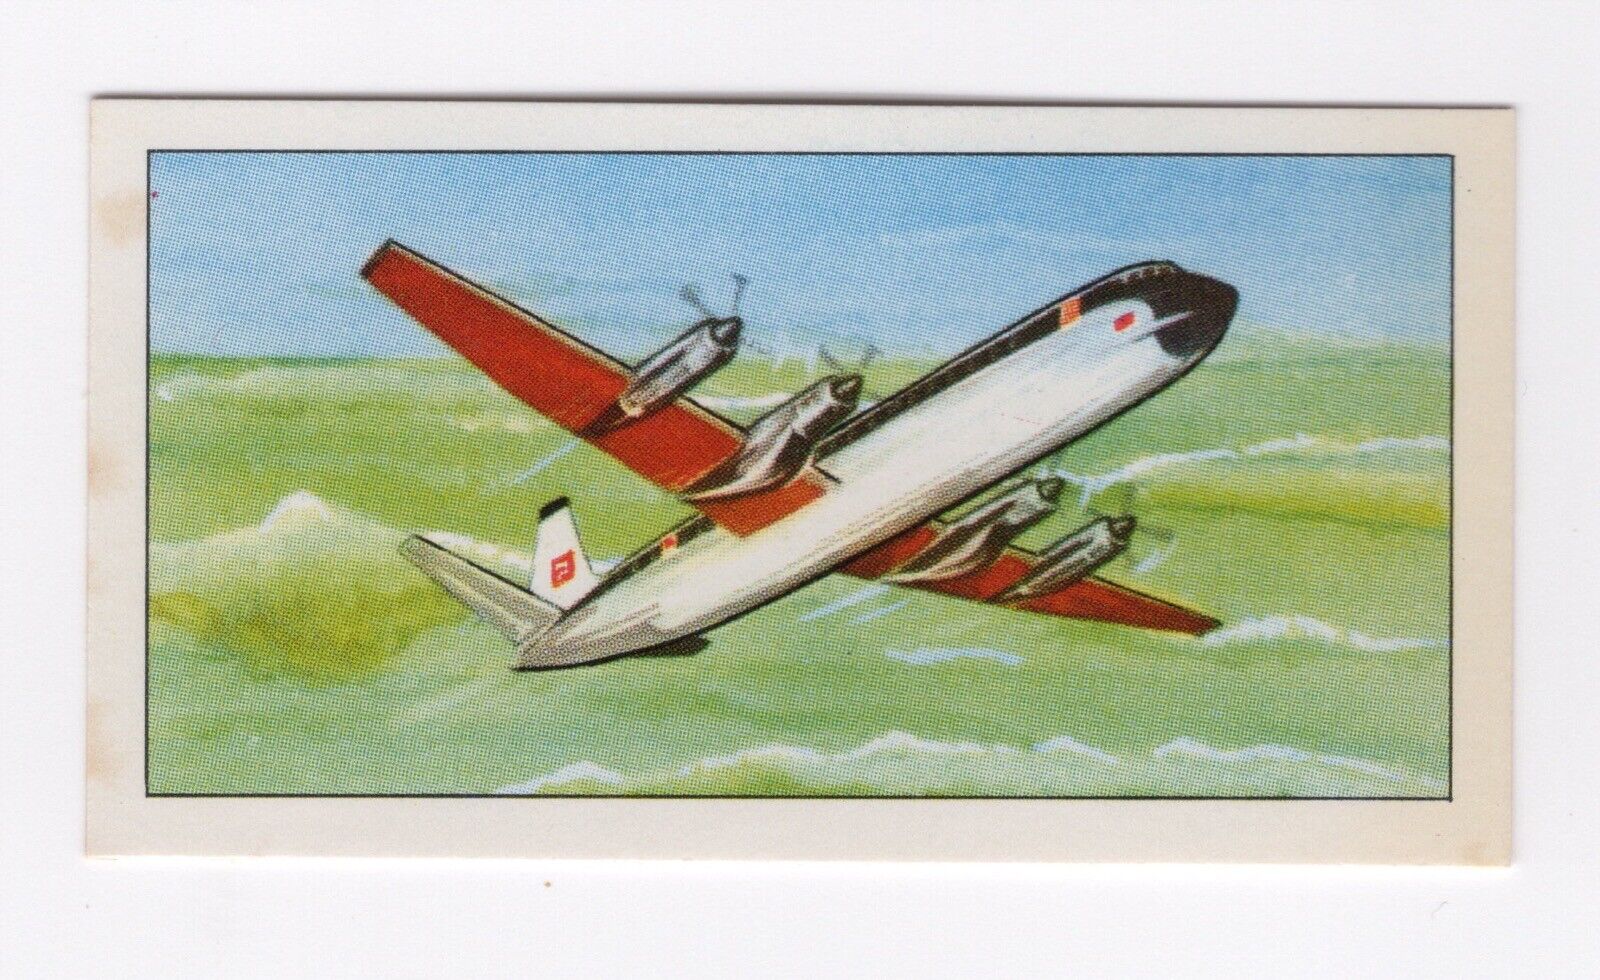 Modern Transport Trade Card 1966. BEA Vickers Armstrong Vanguard 951